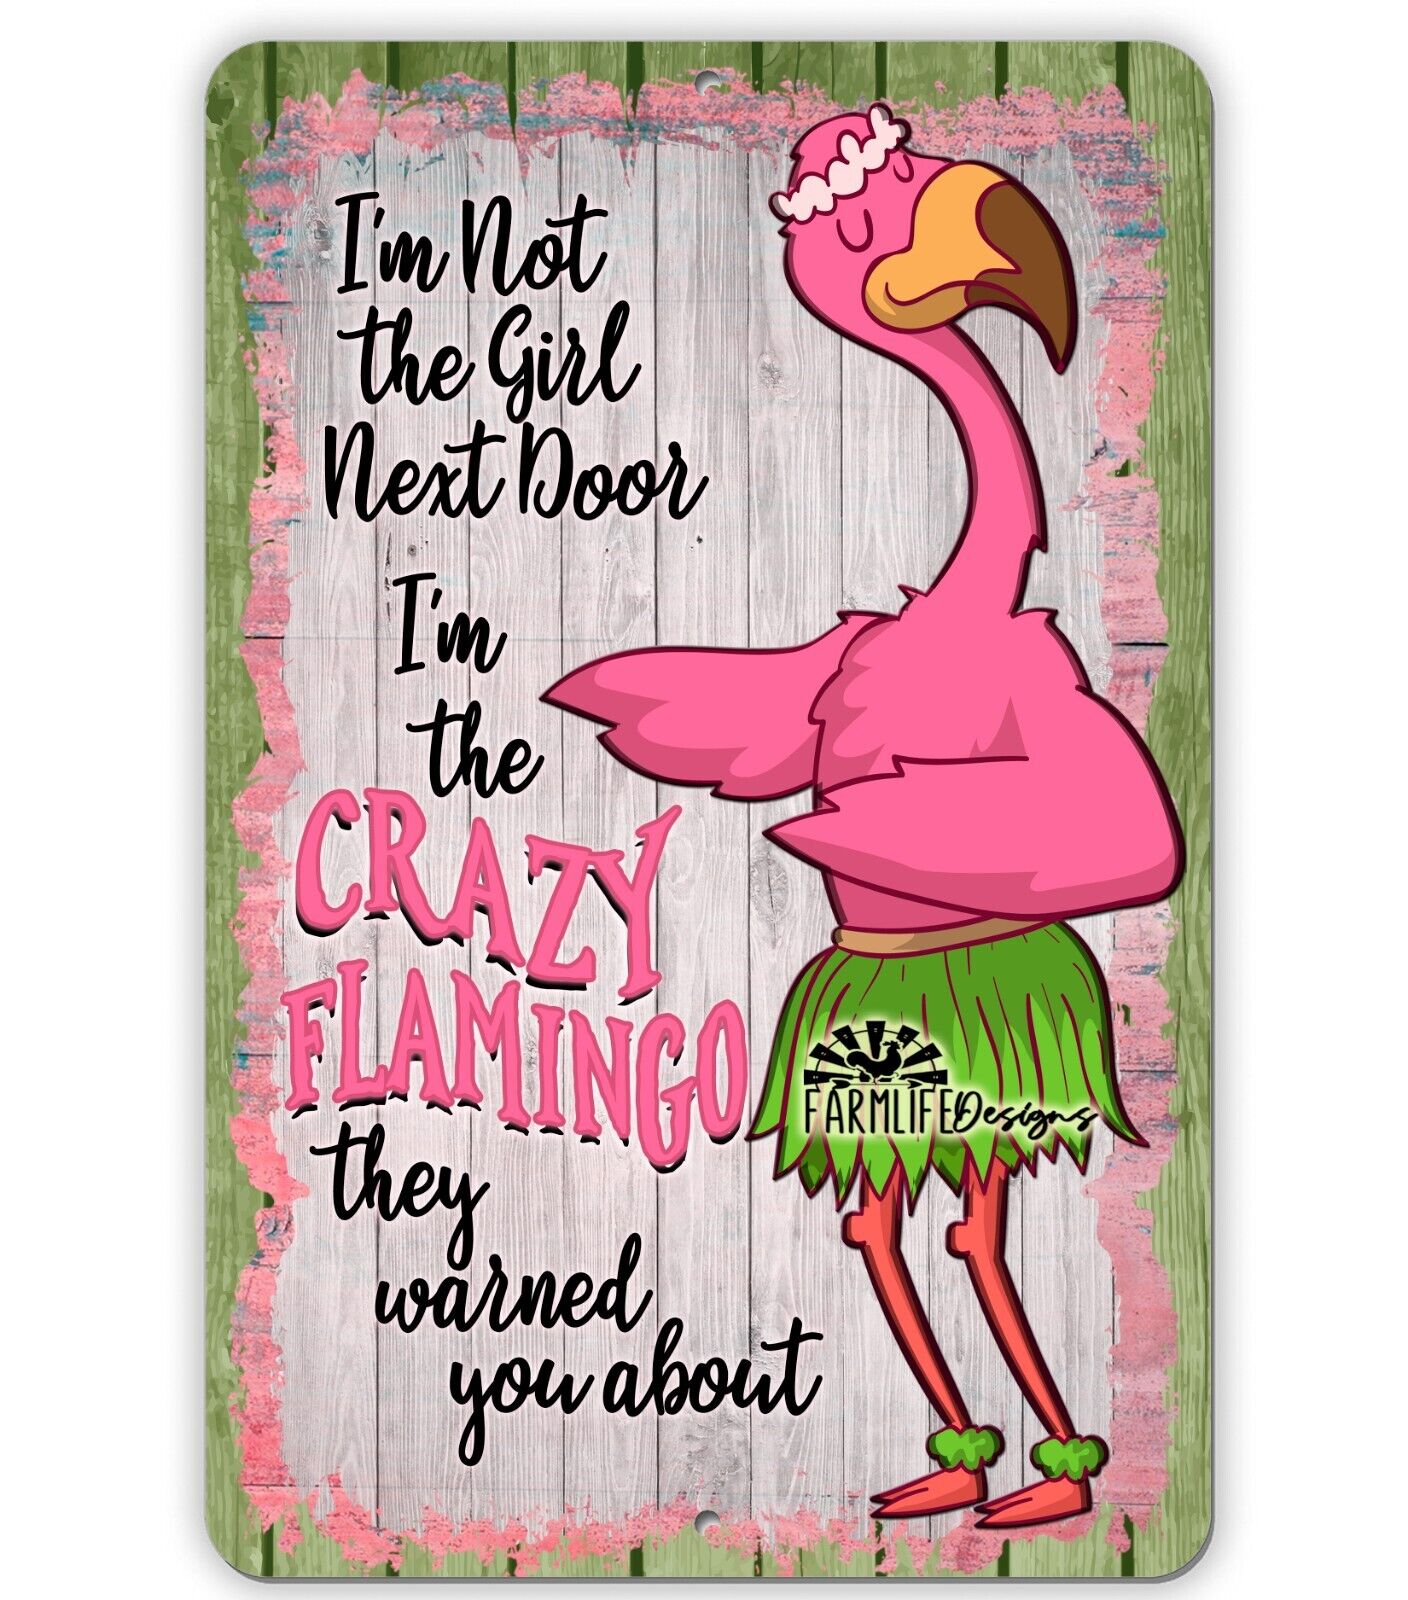 Crazy Flamingo Sign, Flamingo in Grass Skirt they warned you,  8x12 handmade